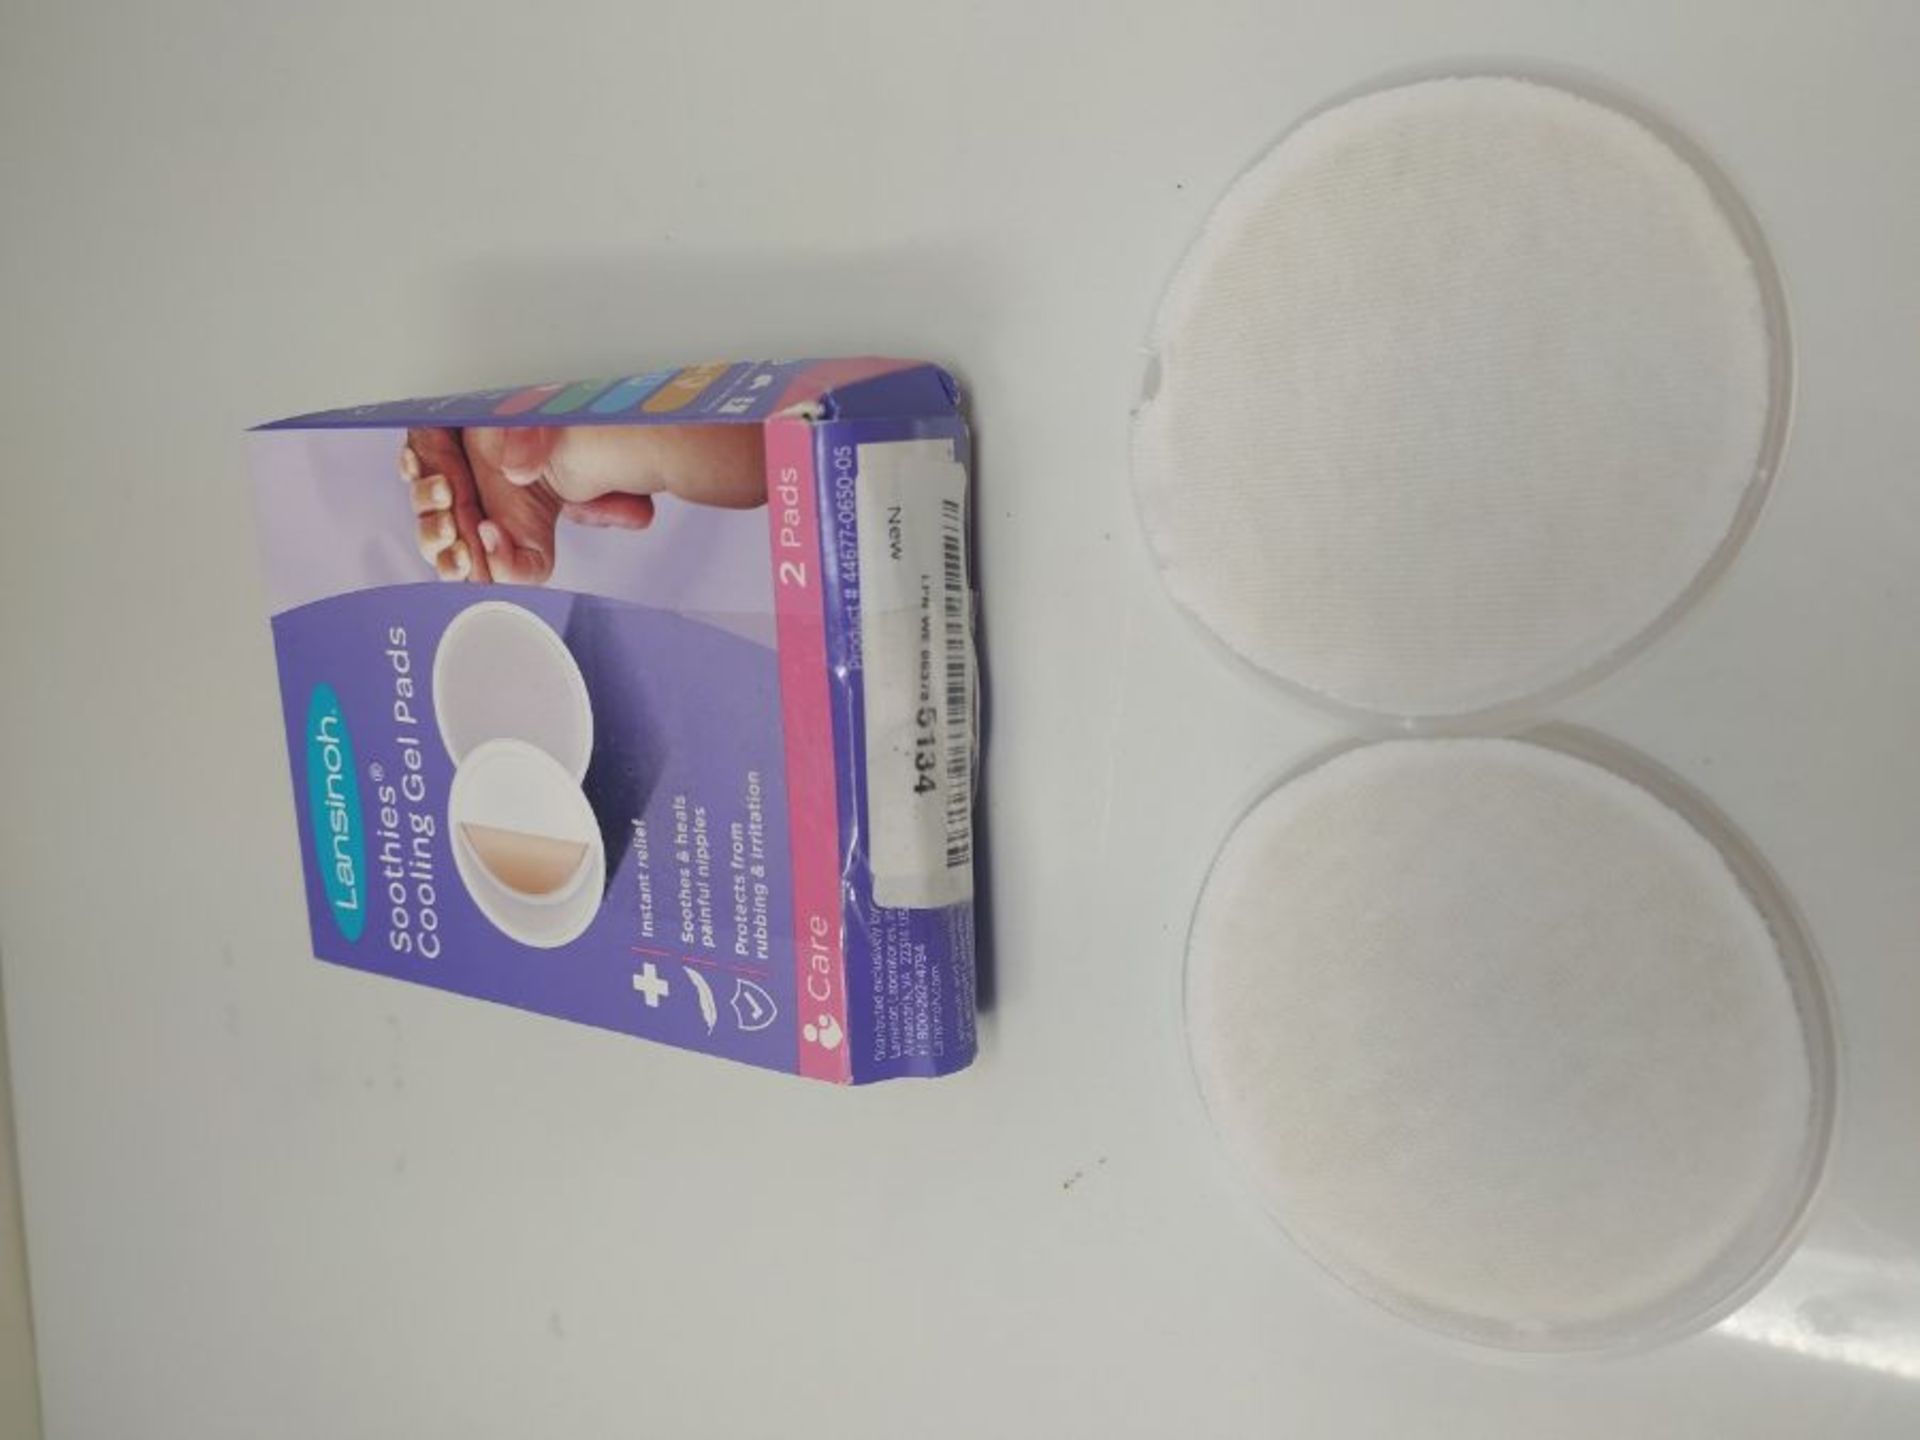 Lansinoh 65005p Soothies Gel Pad for Breastfeeding Mother, Instant Cooling, Pain Relie - Image 2 of 2